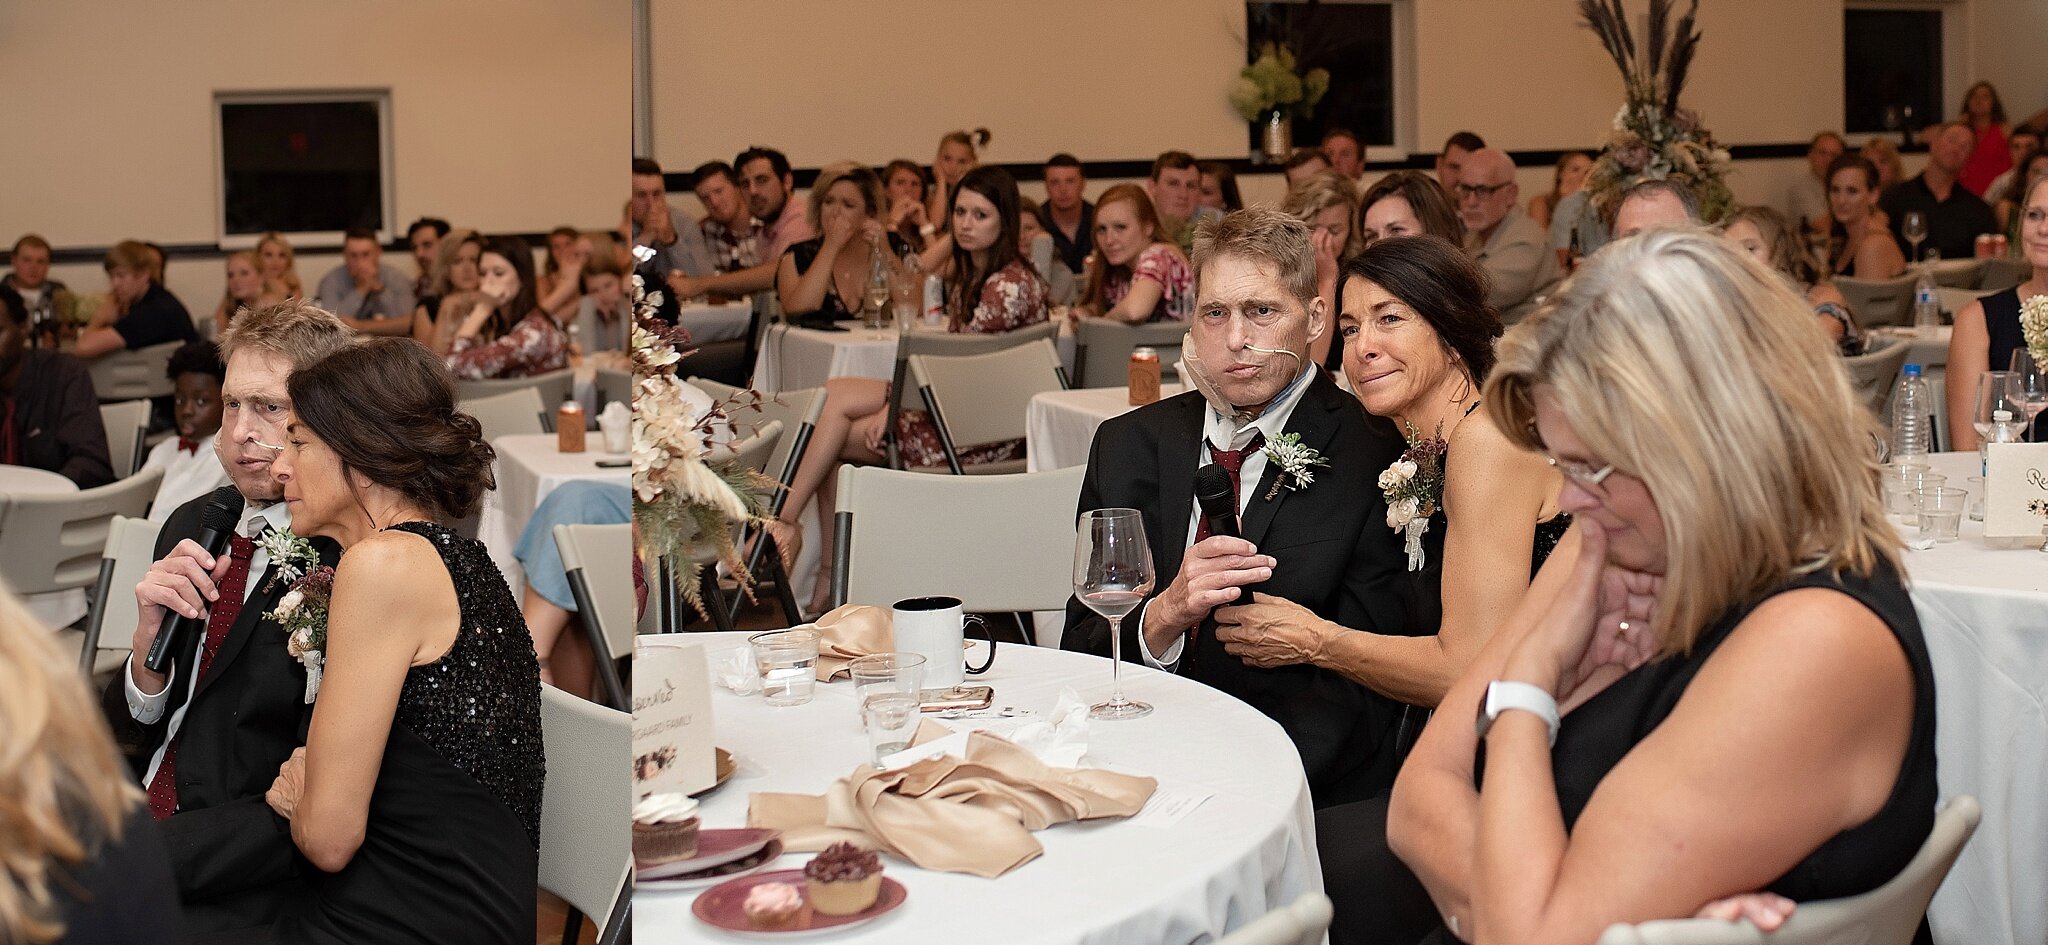 terminally ill father gives a speech at his daughter's wedding